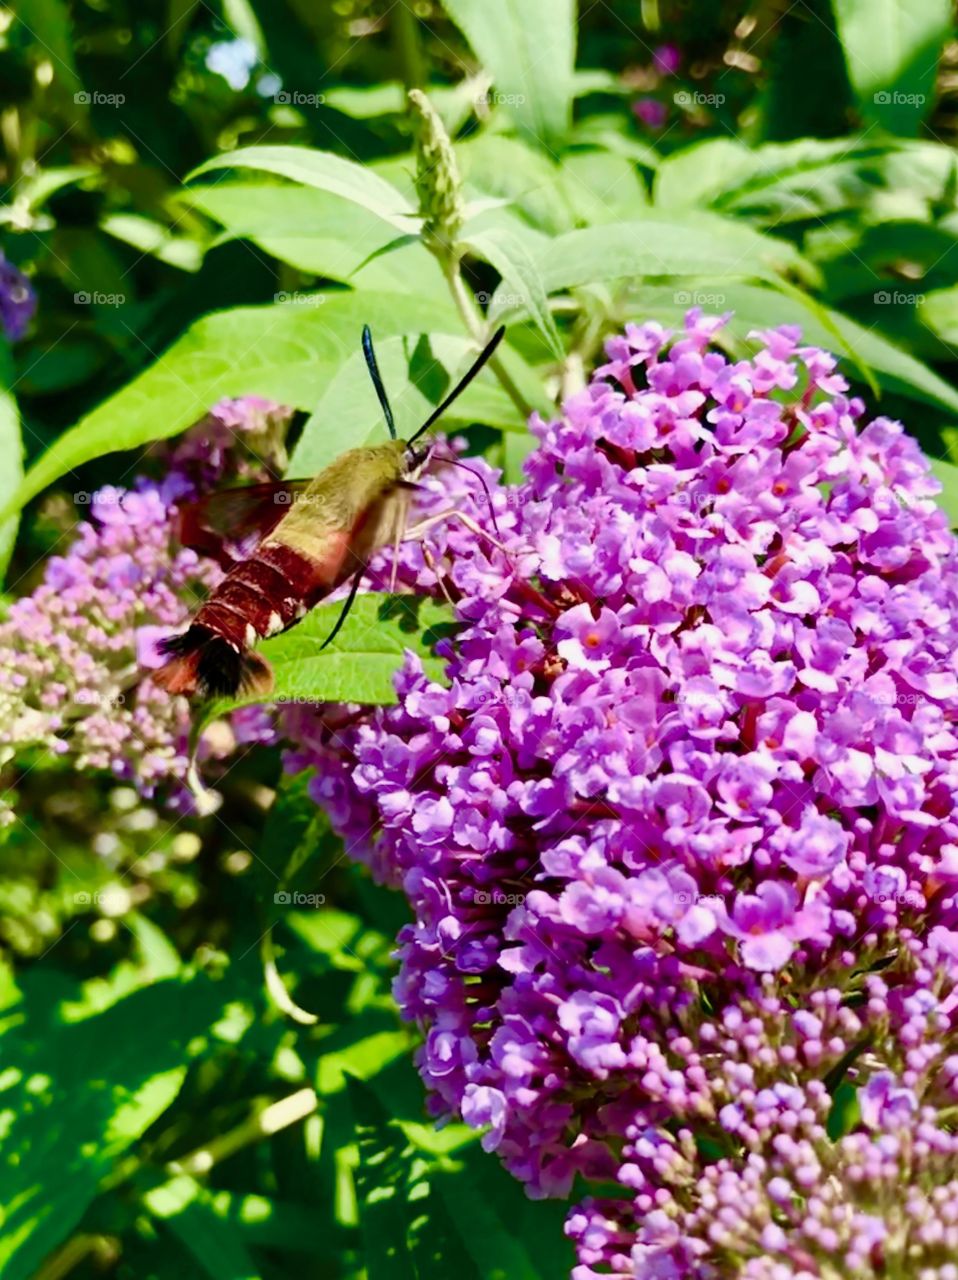 Big bug flying in the flowers in the sunny park 